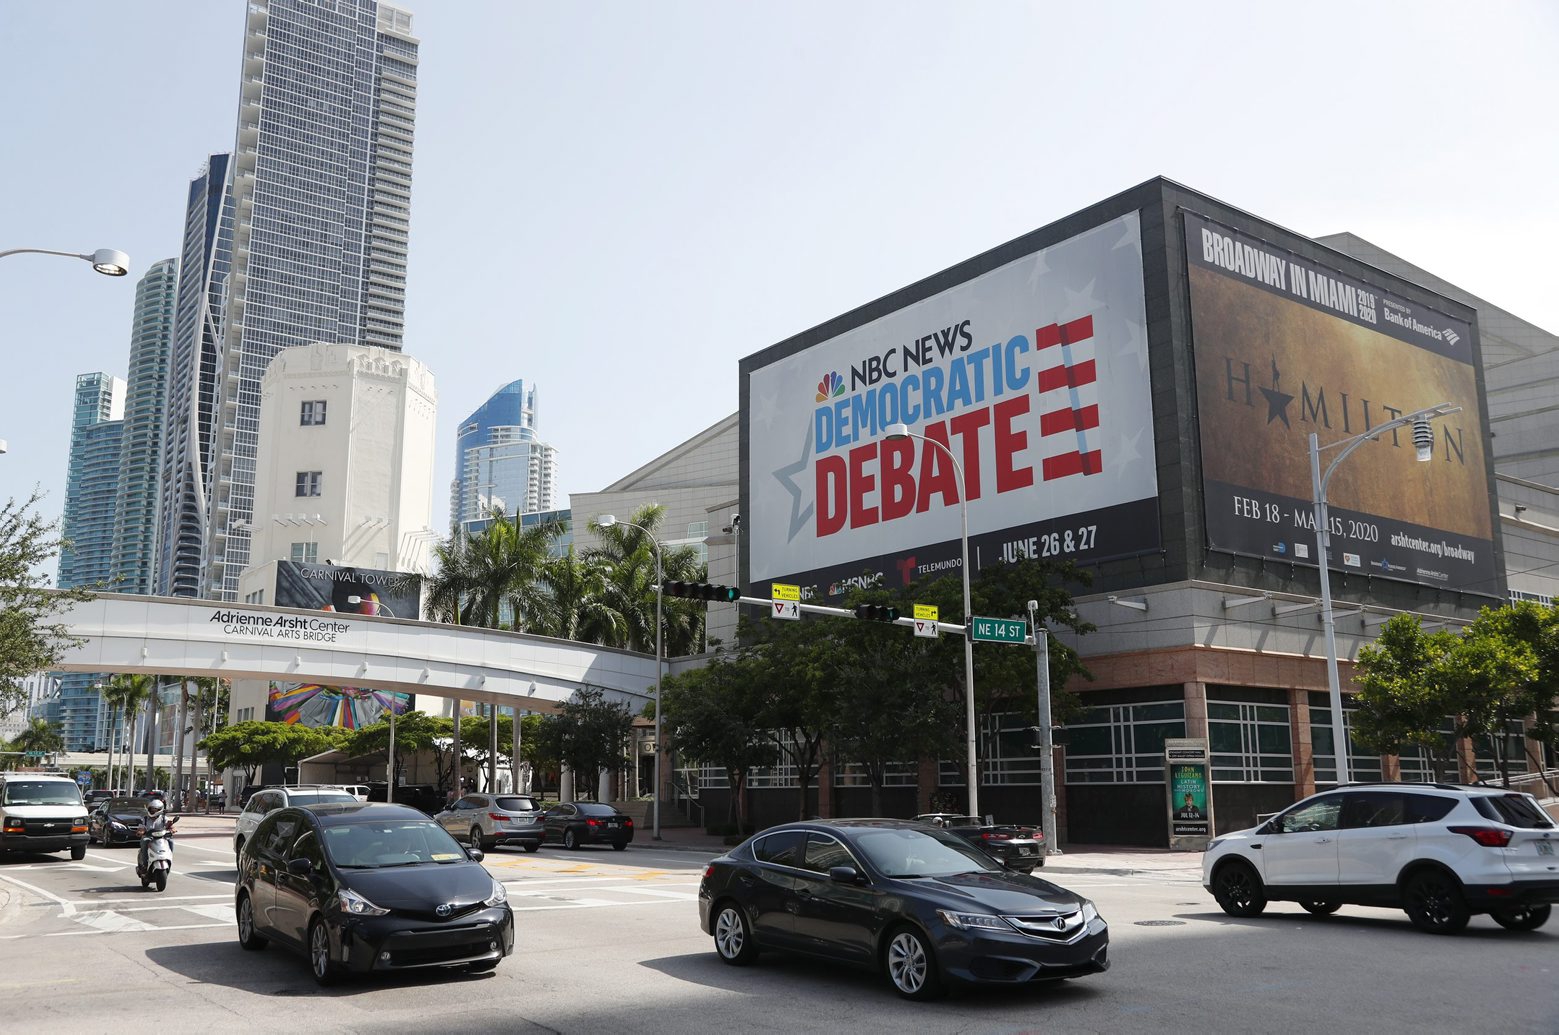 Cars pass by a billboard advertising the Democratic Presidential Debates across from the Knight Concert Hall at the Adrienne Arsht Center for the Performing Arts of Miami-Dade County, Tuesday, June 25, 2019, in Miami. The debates are scheduled to take place June 26 and 27, with 10 candidates competing each night. (AP Photo/Wilfredo Lee) Election 2020 Debate